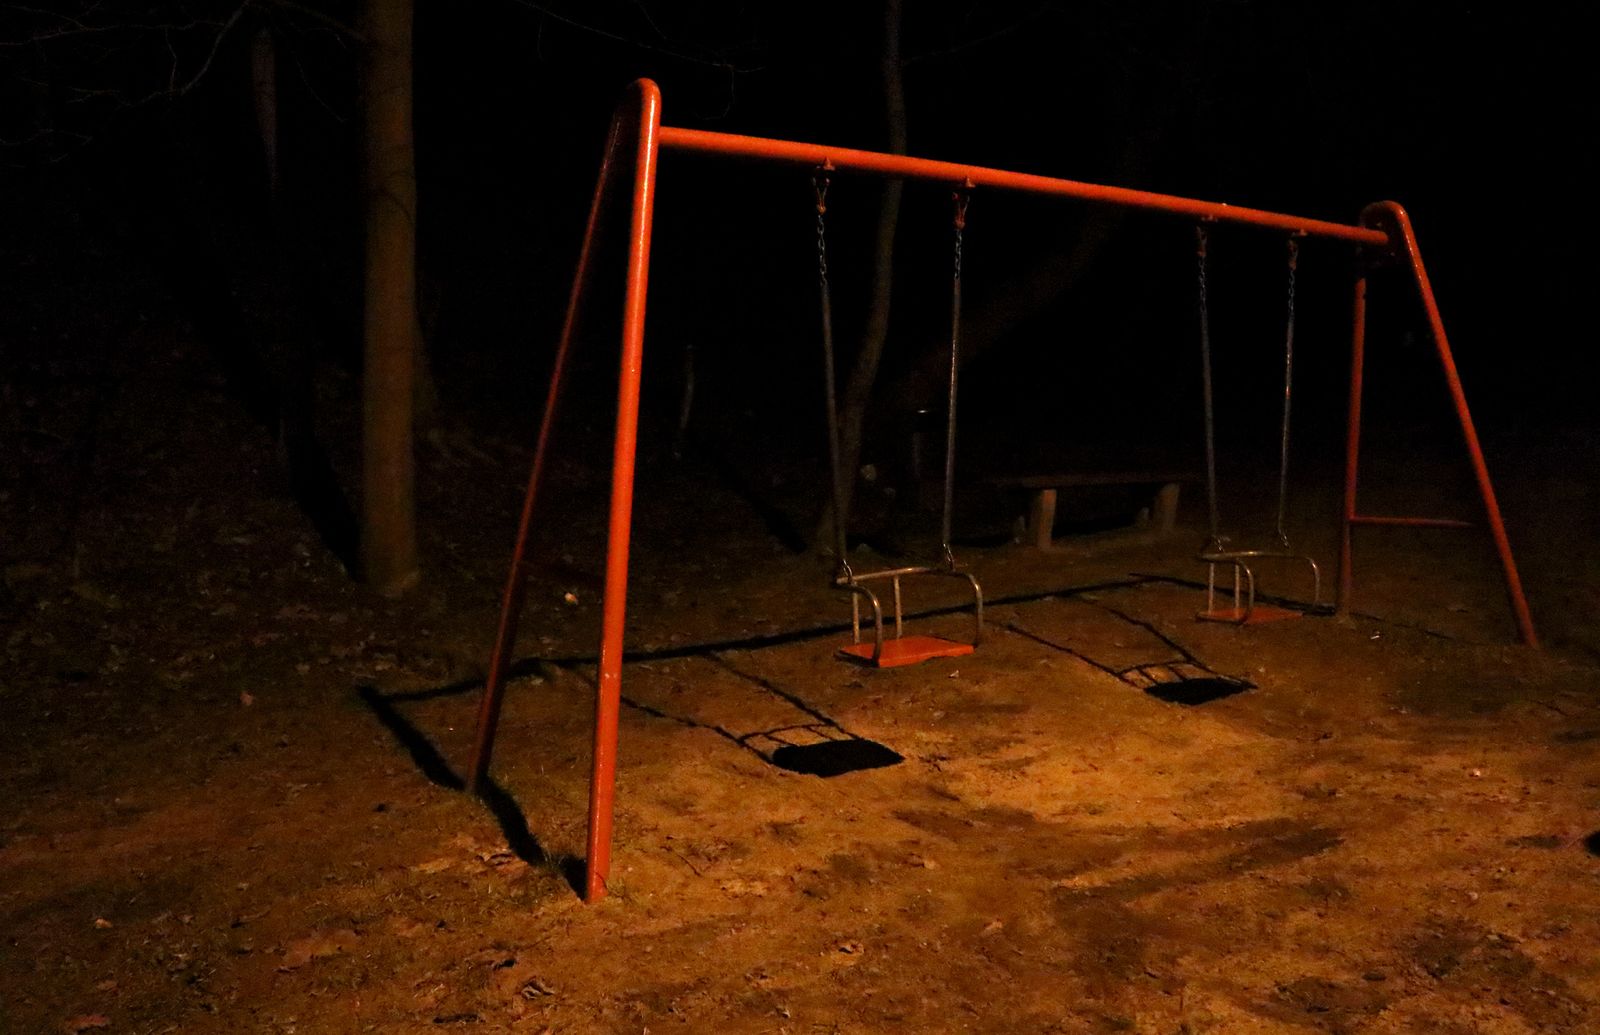 © Orly Morgenstern - Playground at the edge of the border of the Krakow ghetto